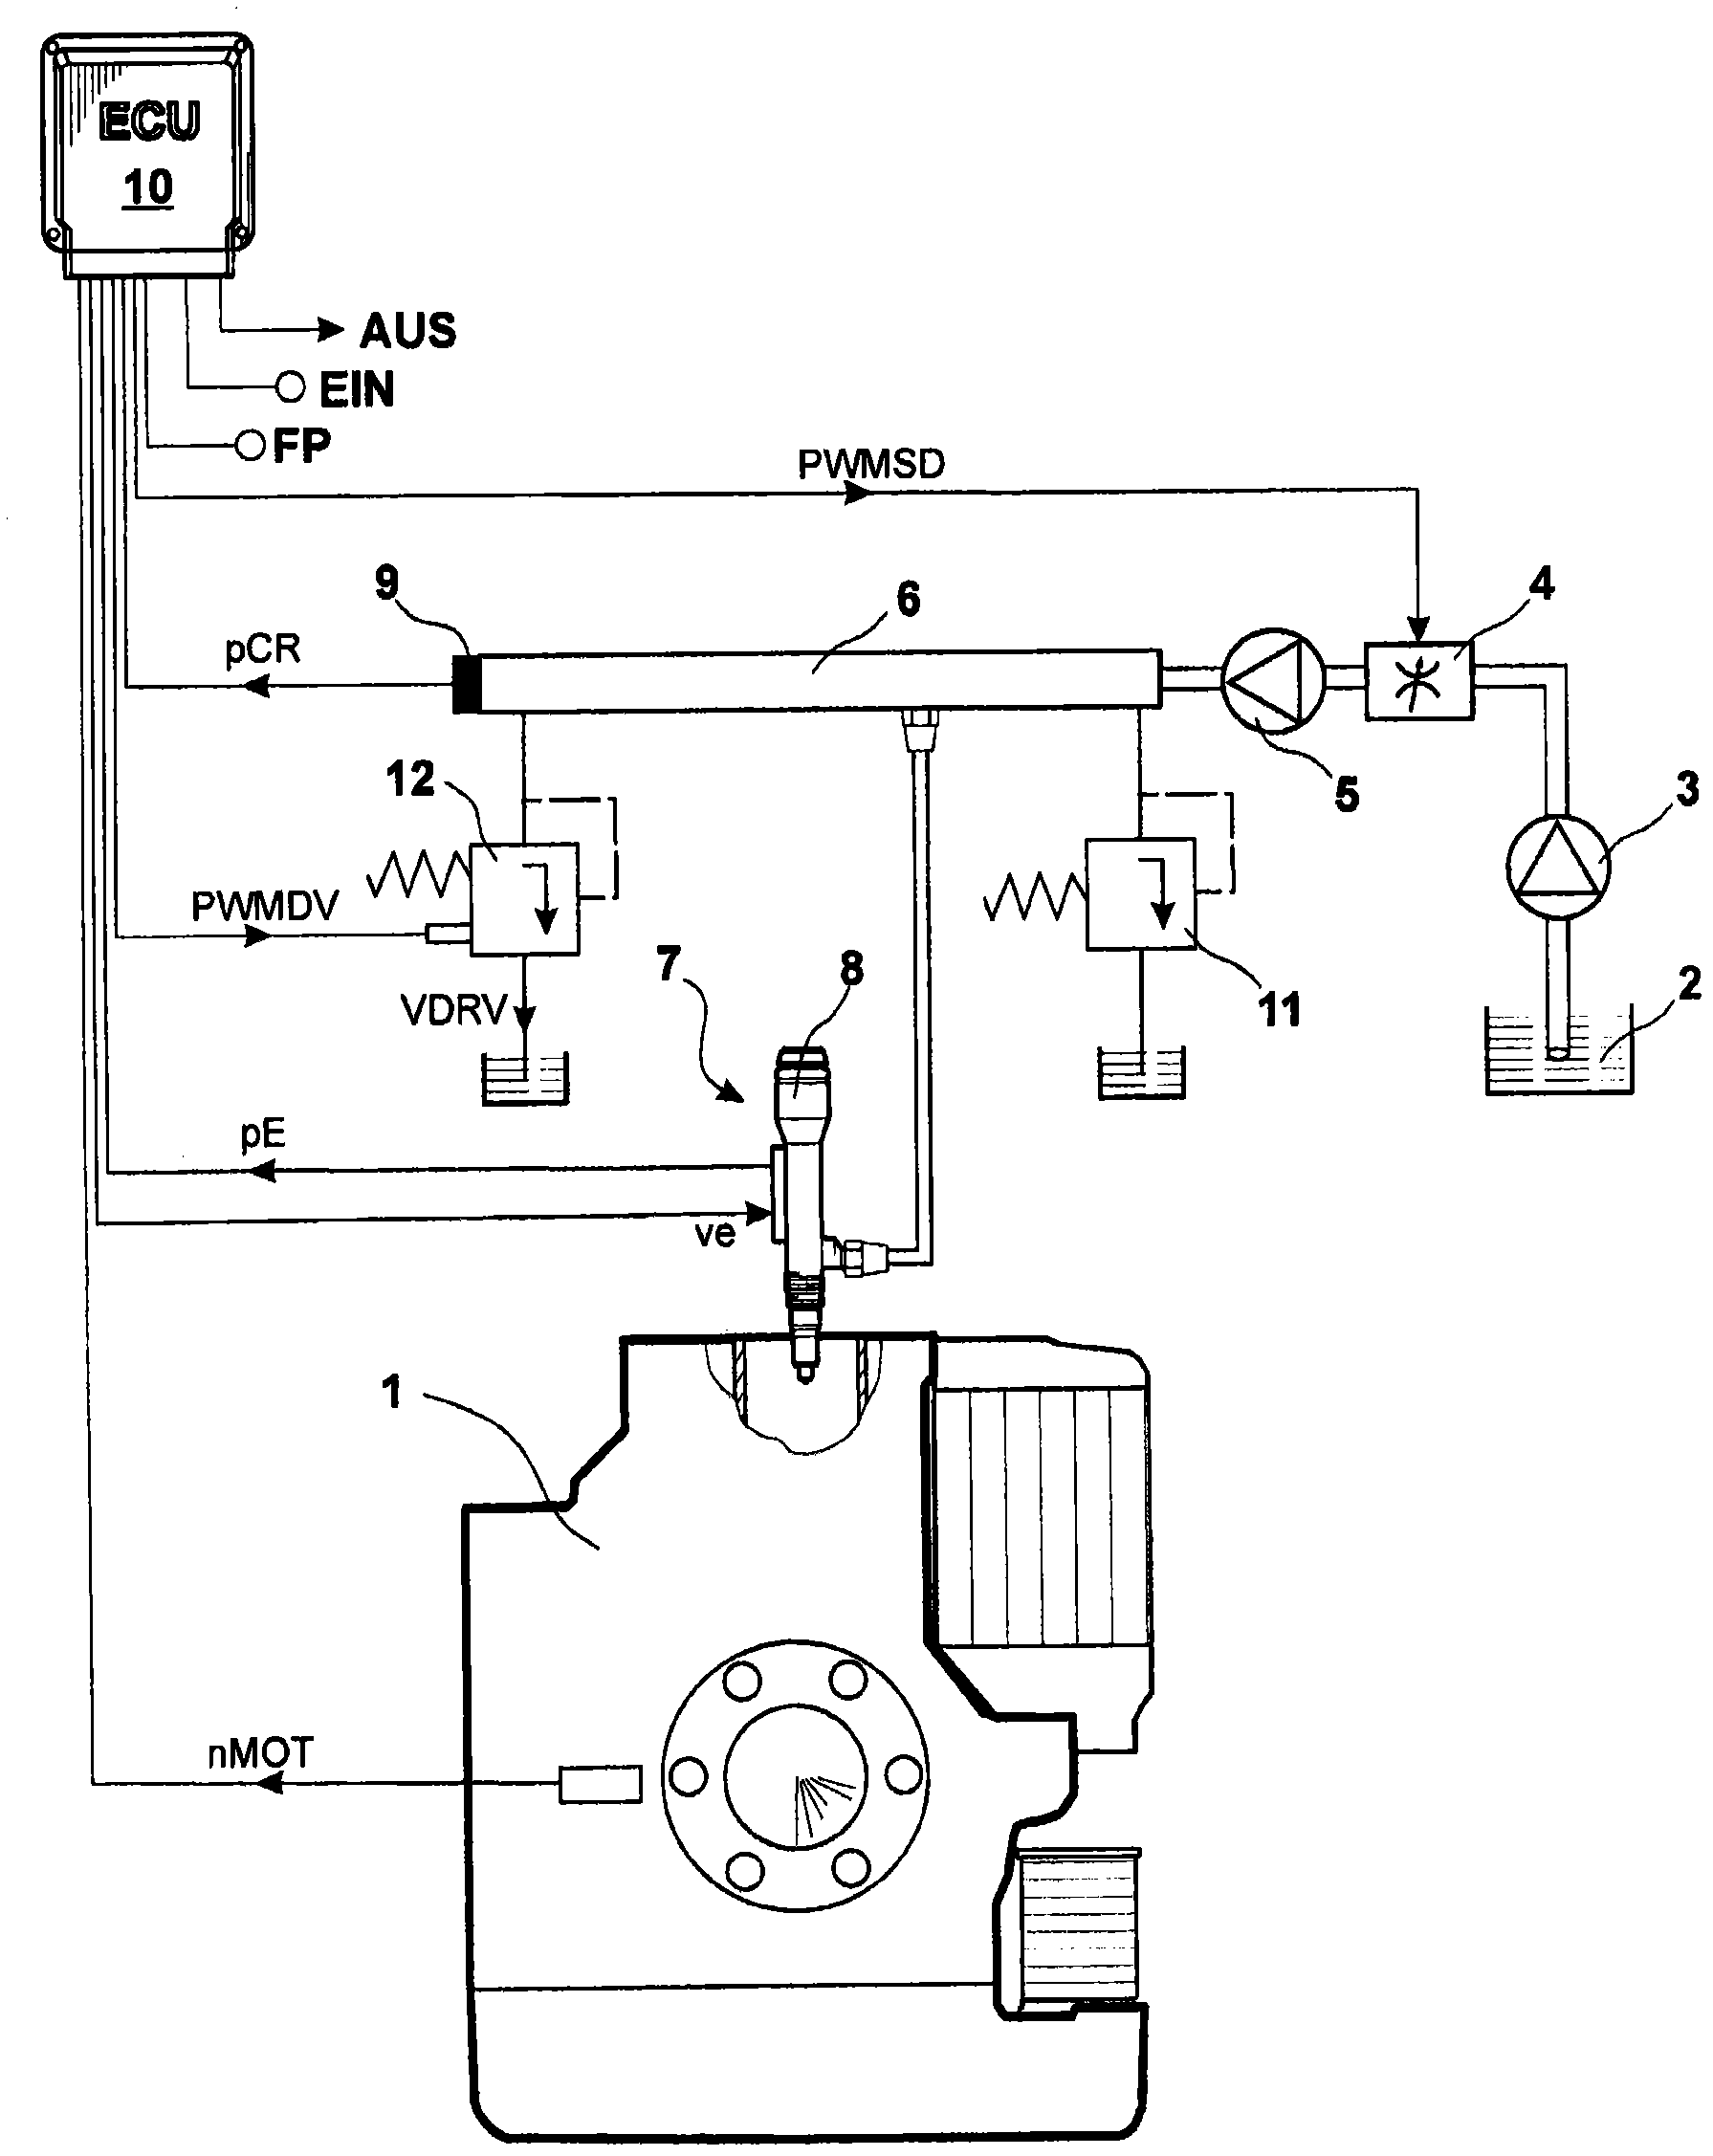 Method for controlling and regulating the fuel pressure in the common rail of an internal combustion engine